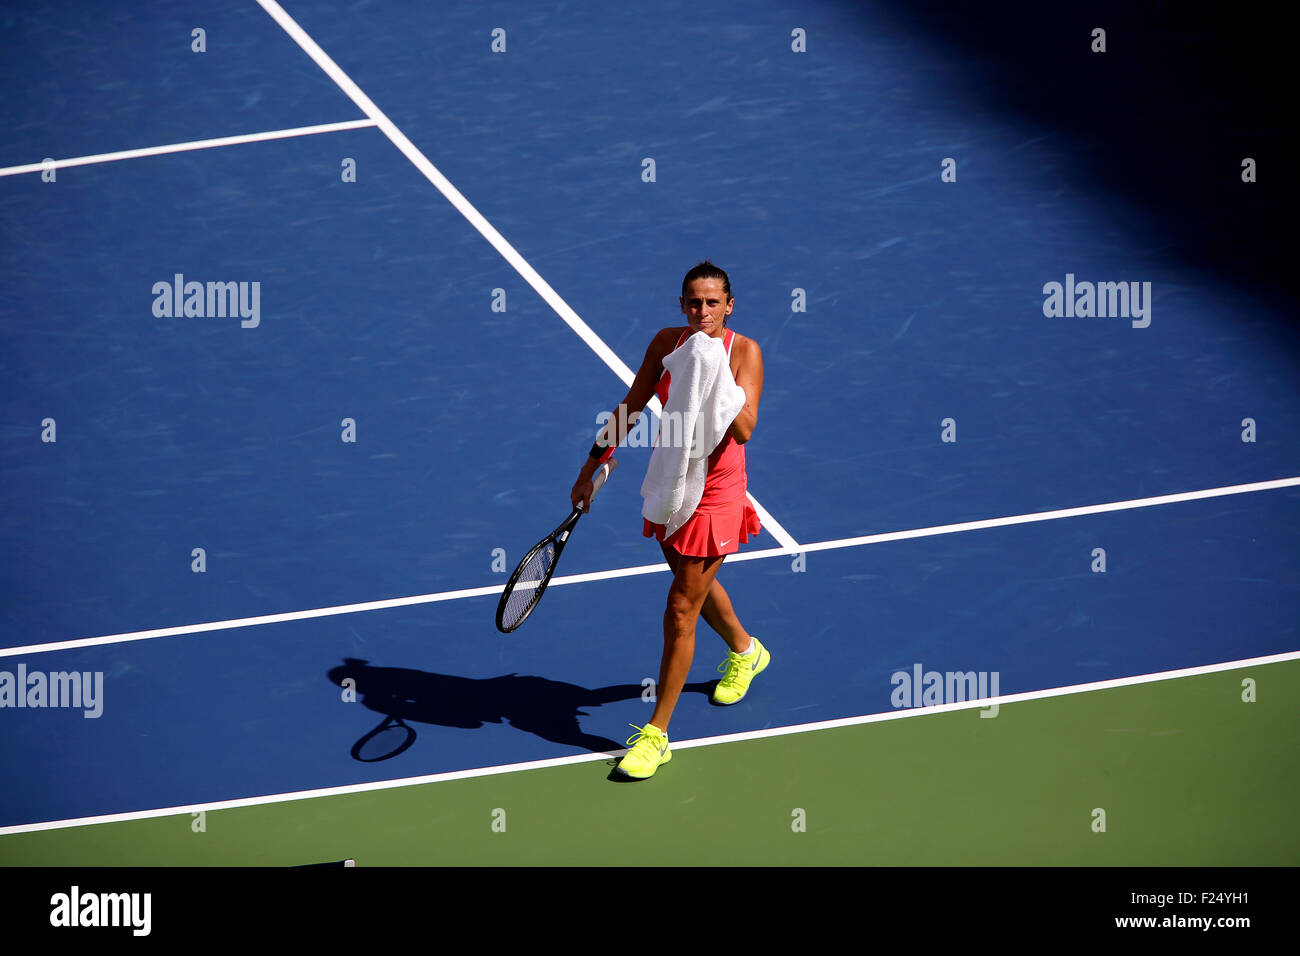 Flushing Meadows, New York, USA. 11th Sep, 2015. Roberta Vinci of Italy on a changeover during her upset victory over Serena Williams in their semifinal match at the U.S. Open in Flushing Meadows, New York on the afternoon of September 11th, 2015.  Vinci won the match 2-6, 6-4, 6-4. Credit:  Adam Stoltman/Alamy Live News Stock Photo